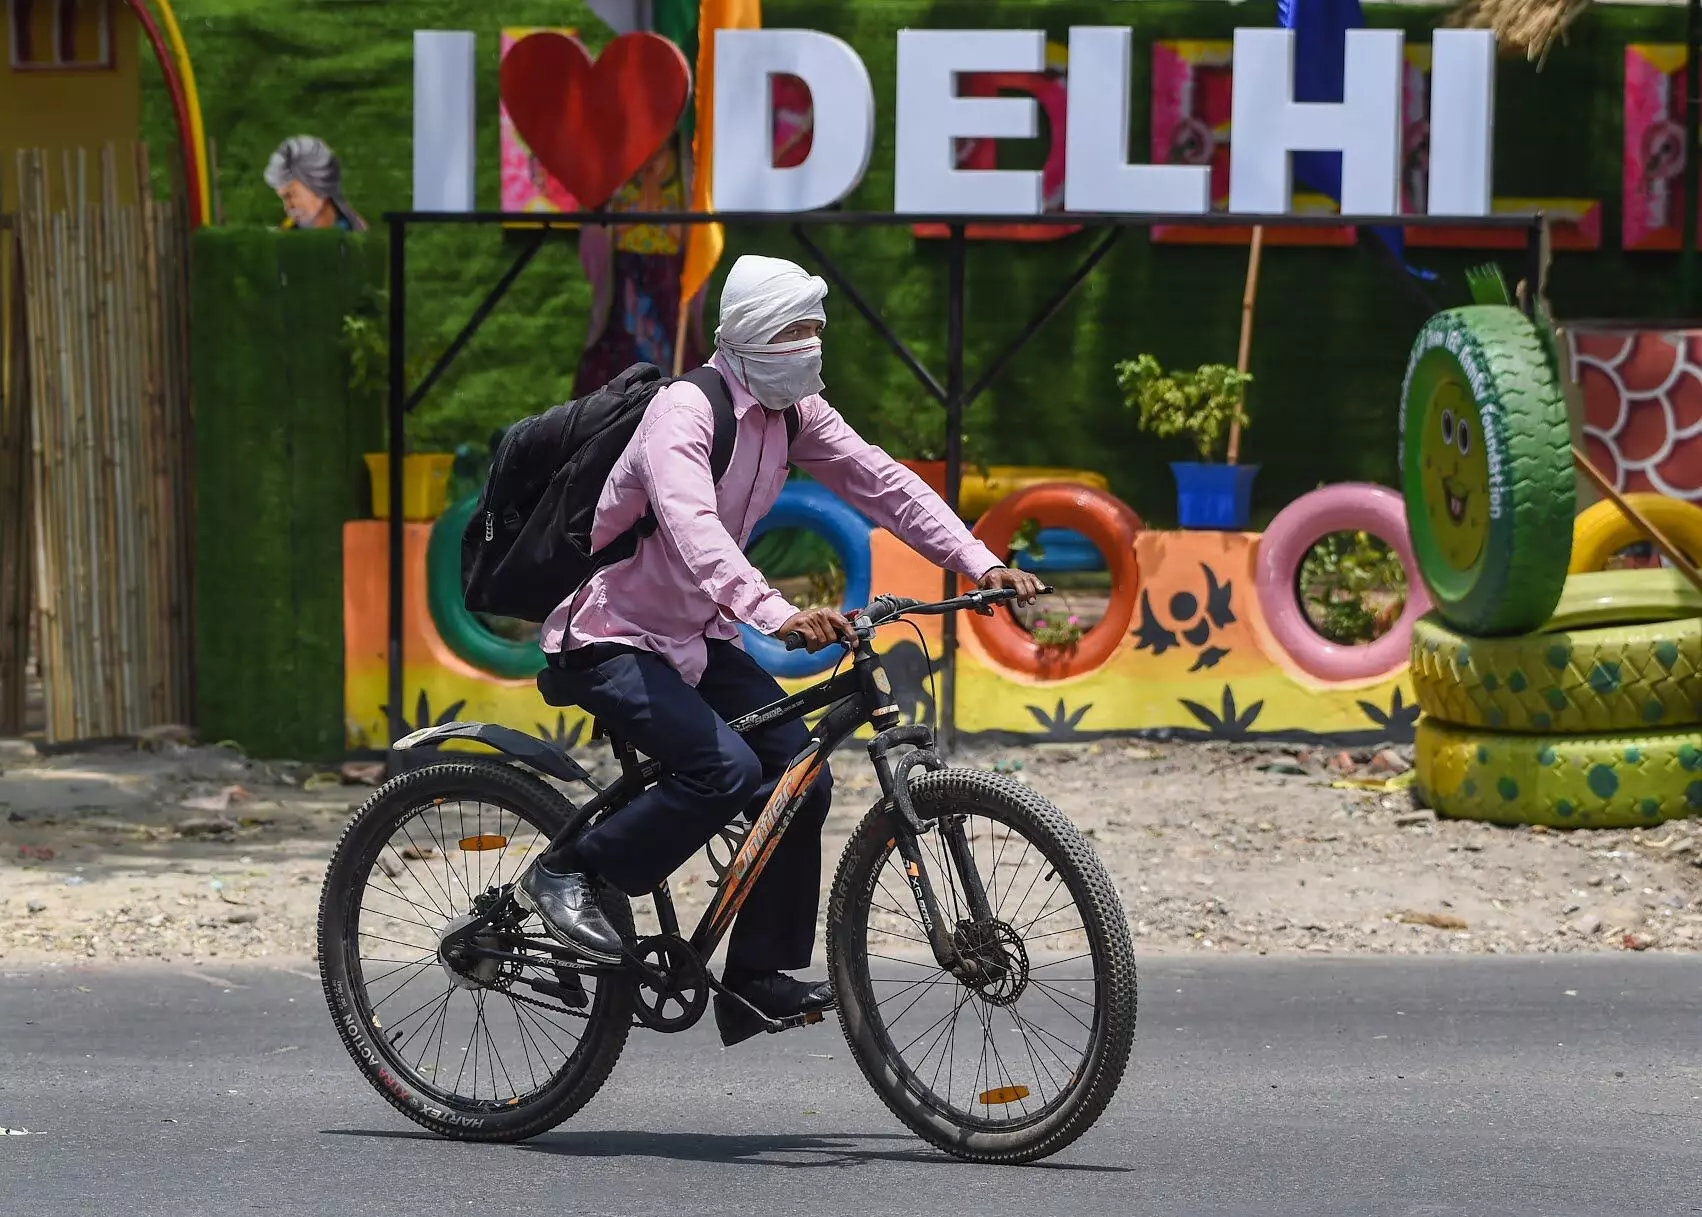 Heatwave likely to abate over Delhi, northwest India from today